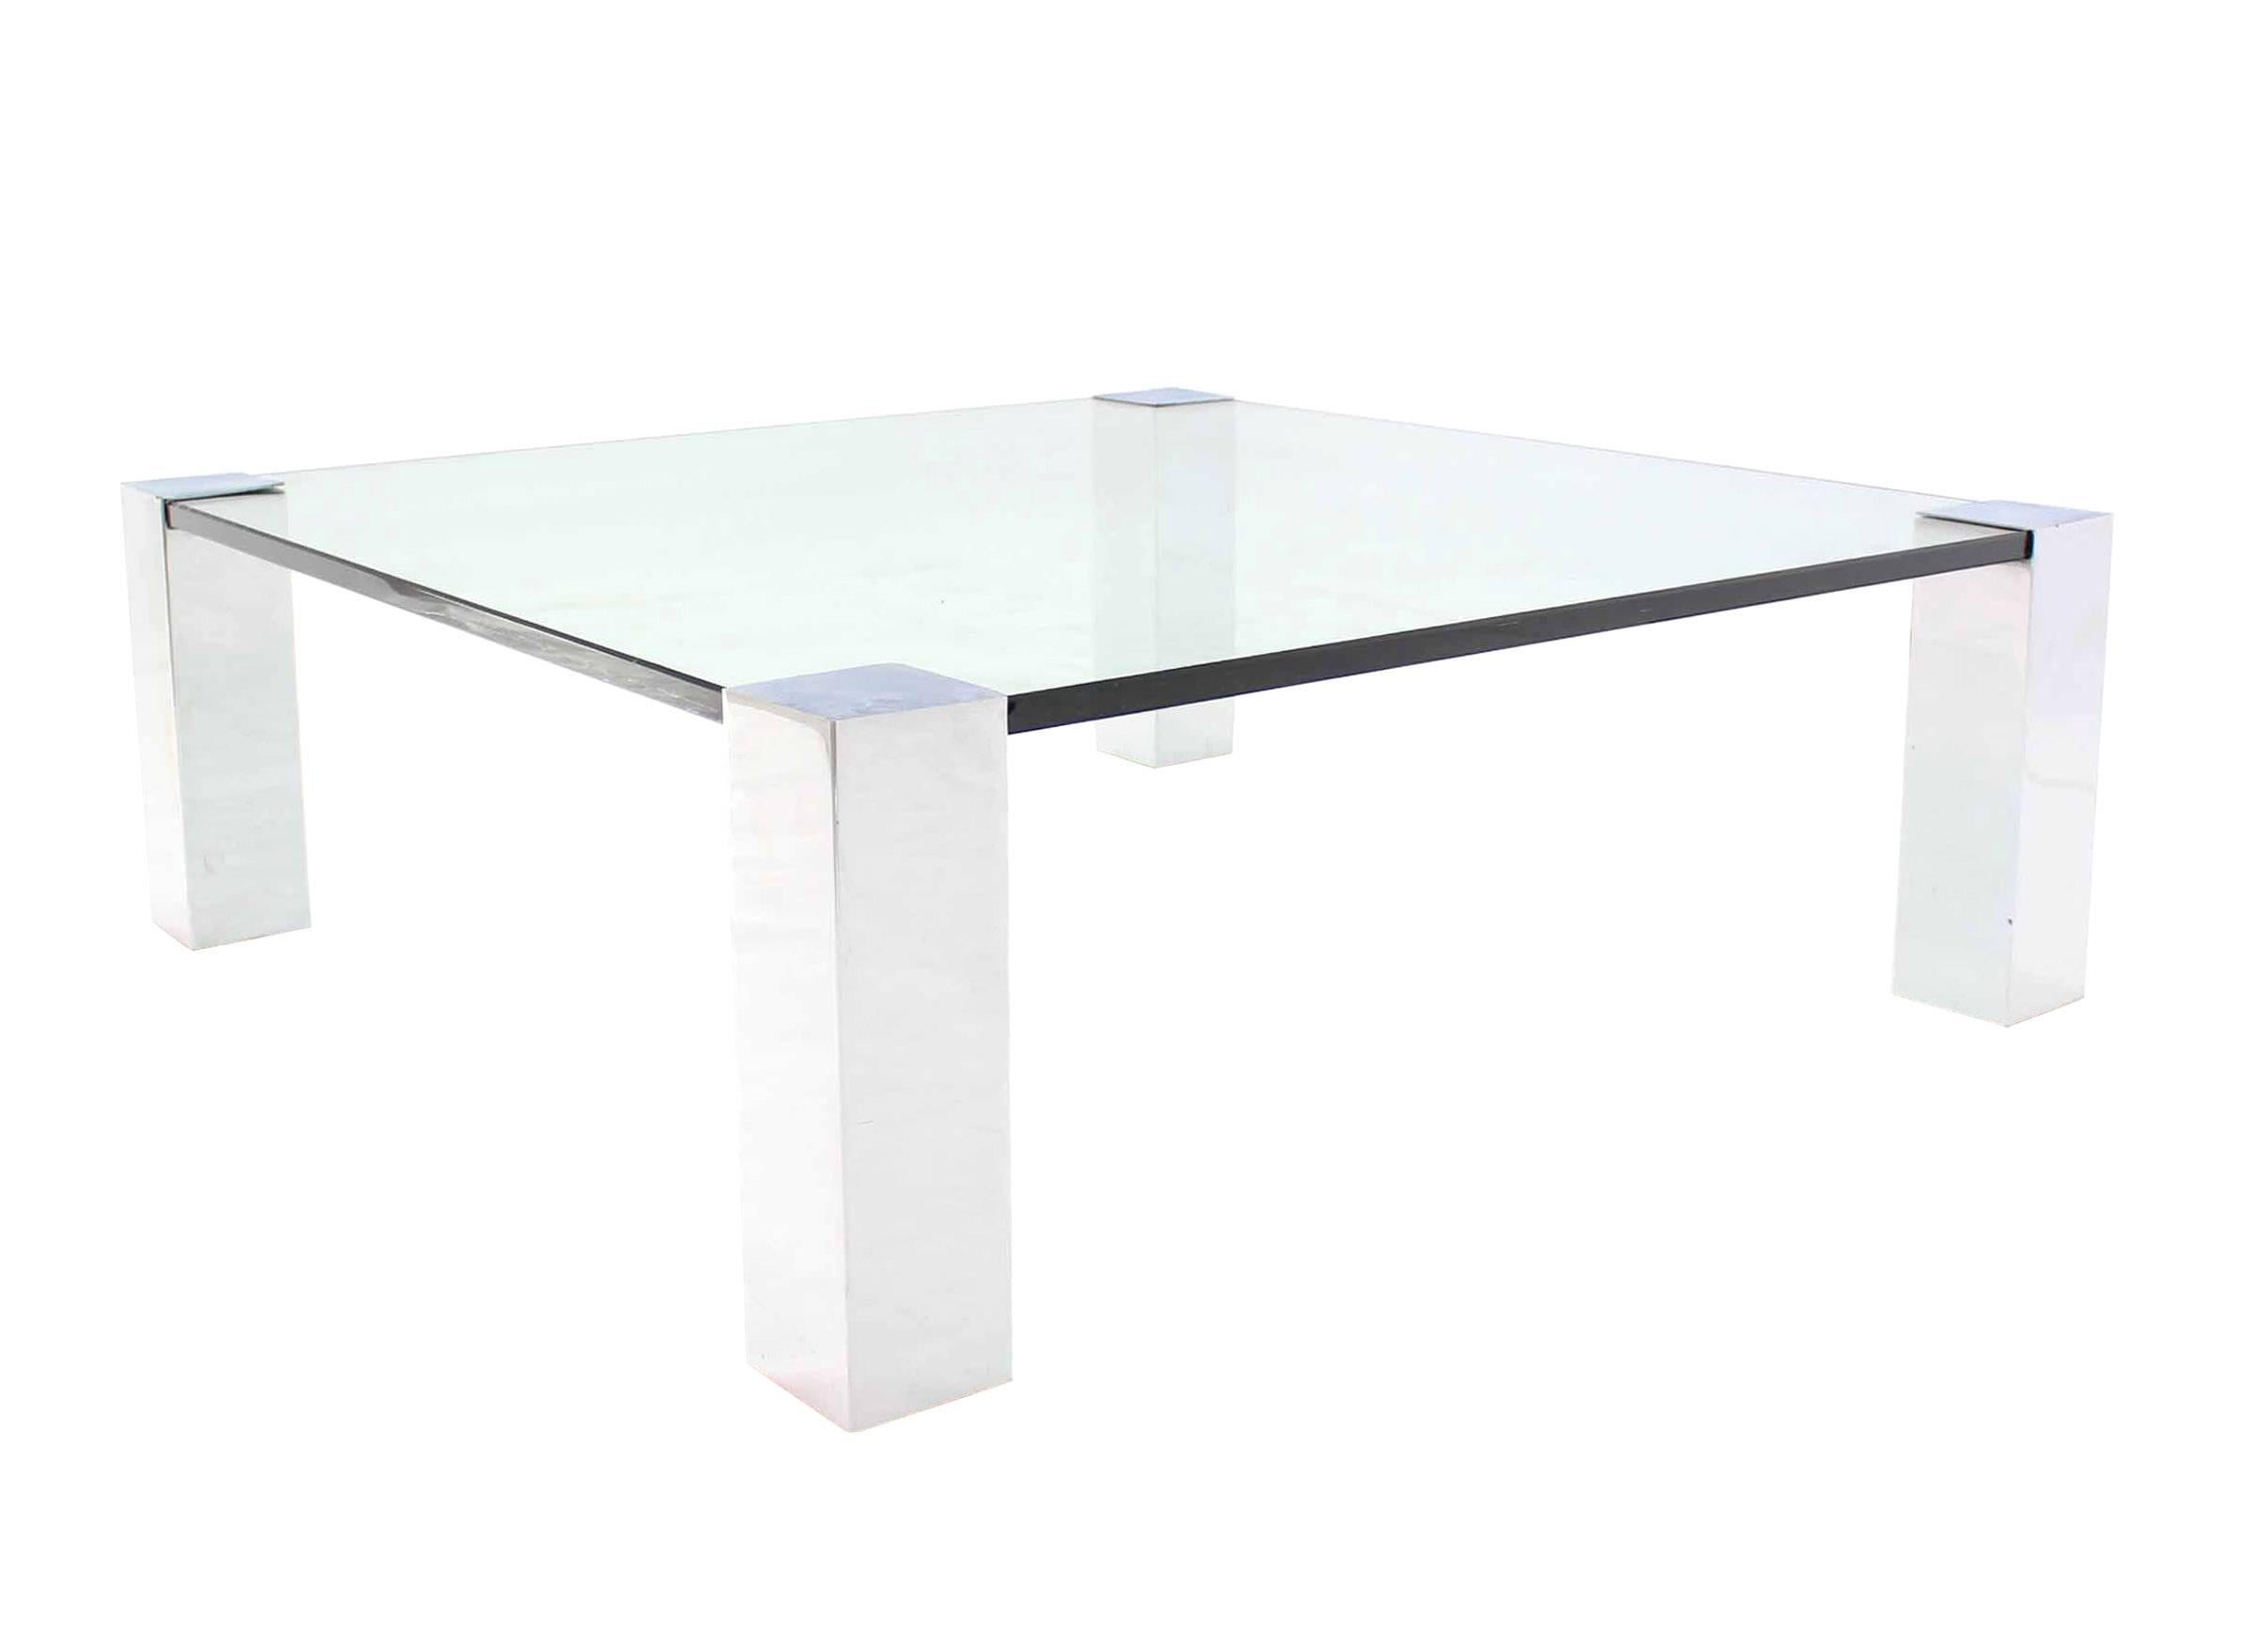 American Large Square Mid Century Modern Coffee Table on Chrome Corner Legs For Sale